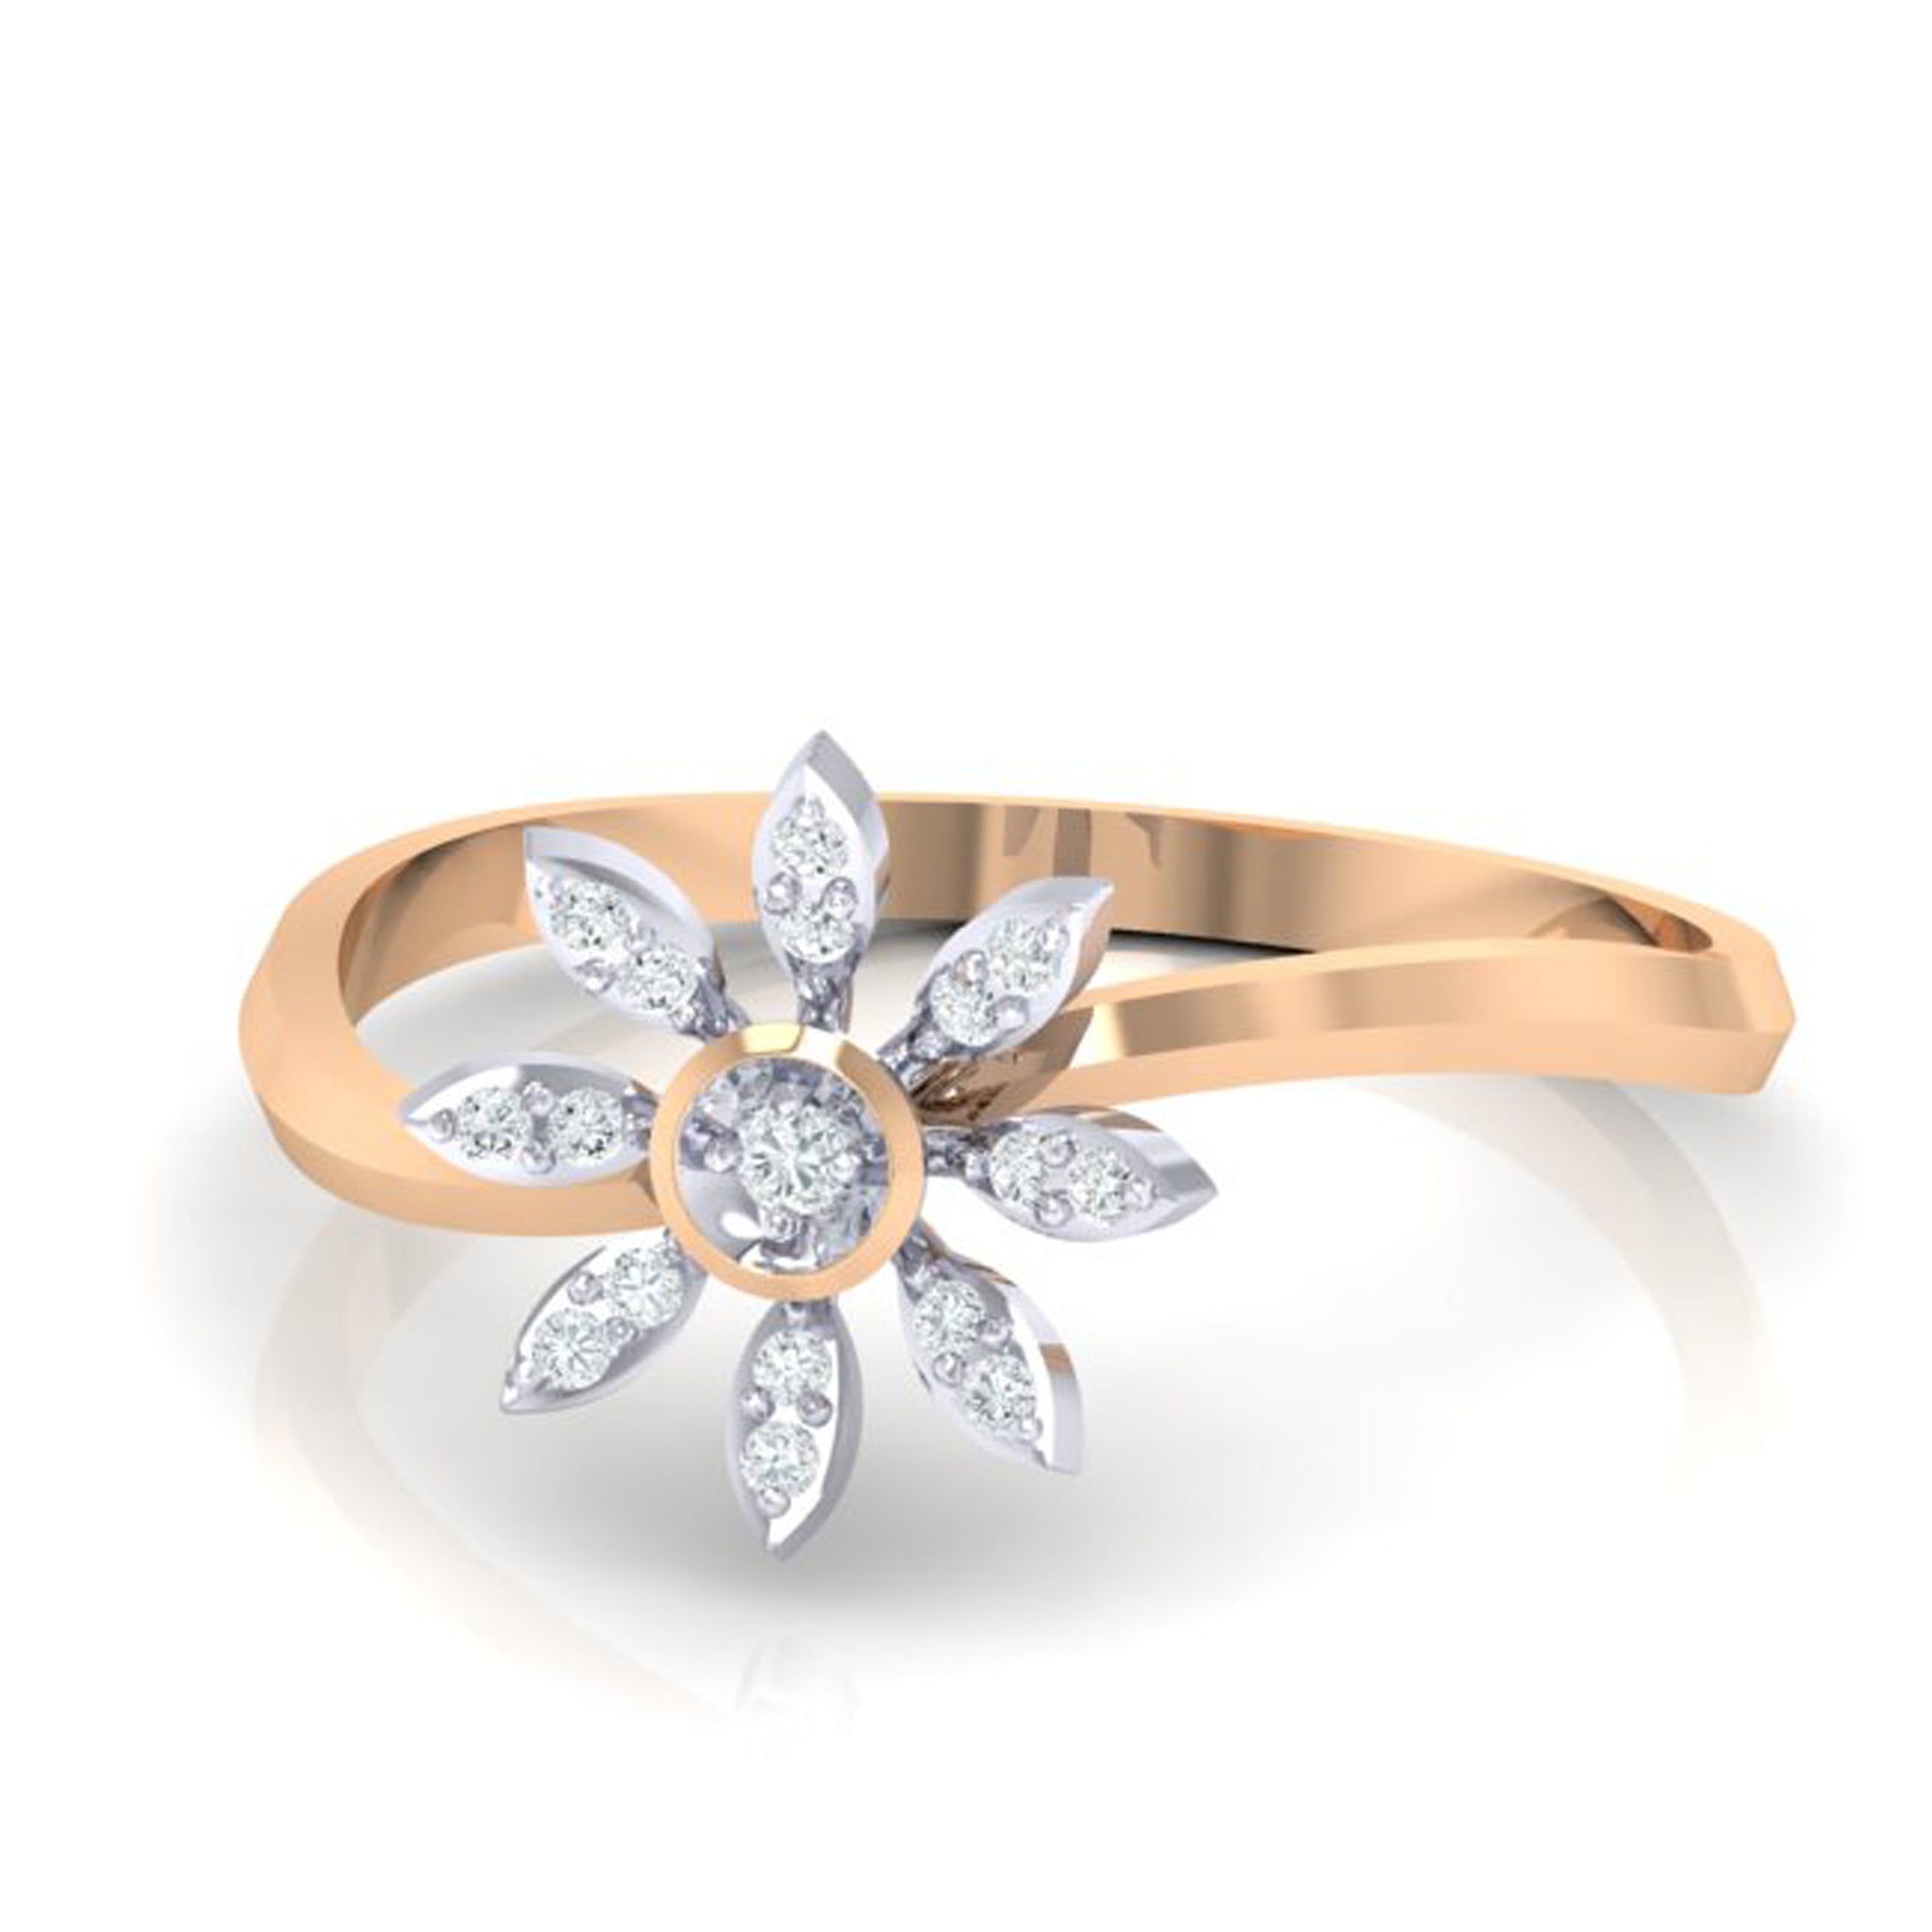 Floral Diamond Engagement Ring | Jewelry by Johan - Jewelry by Johan